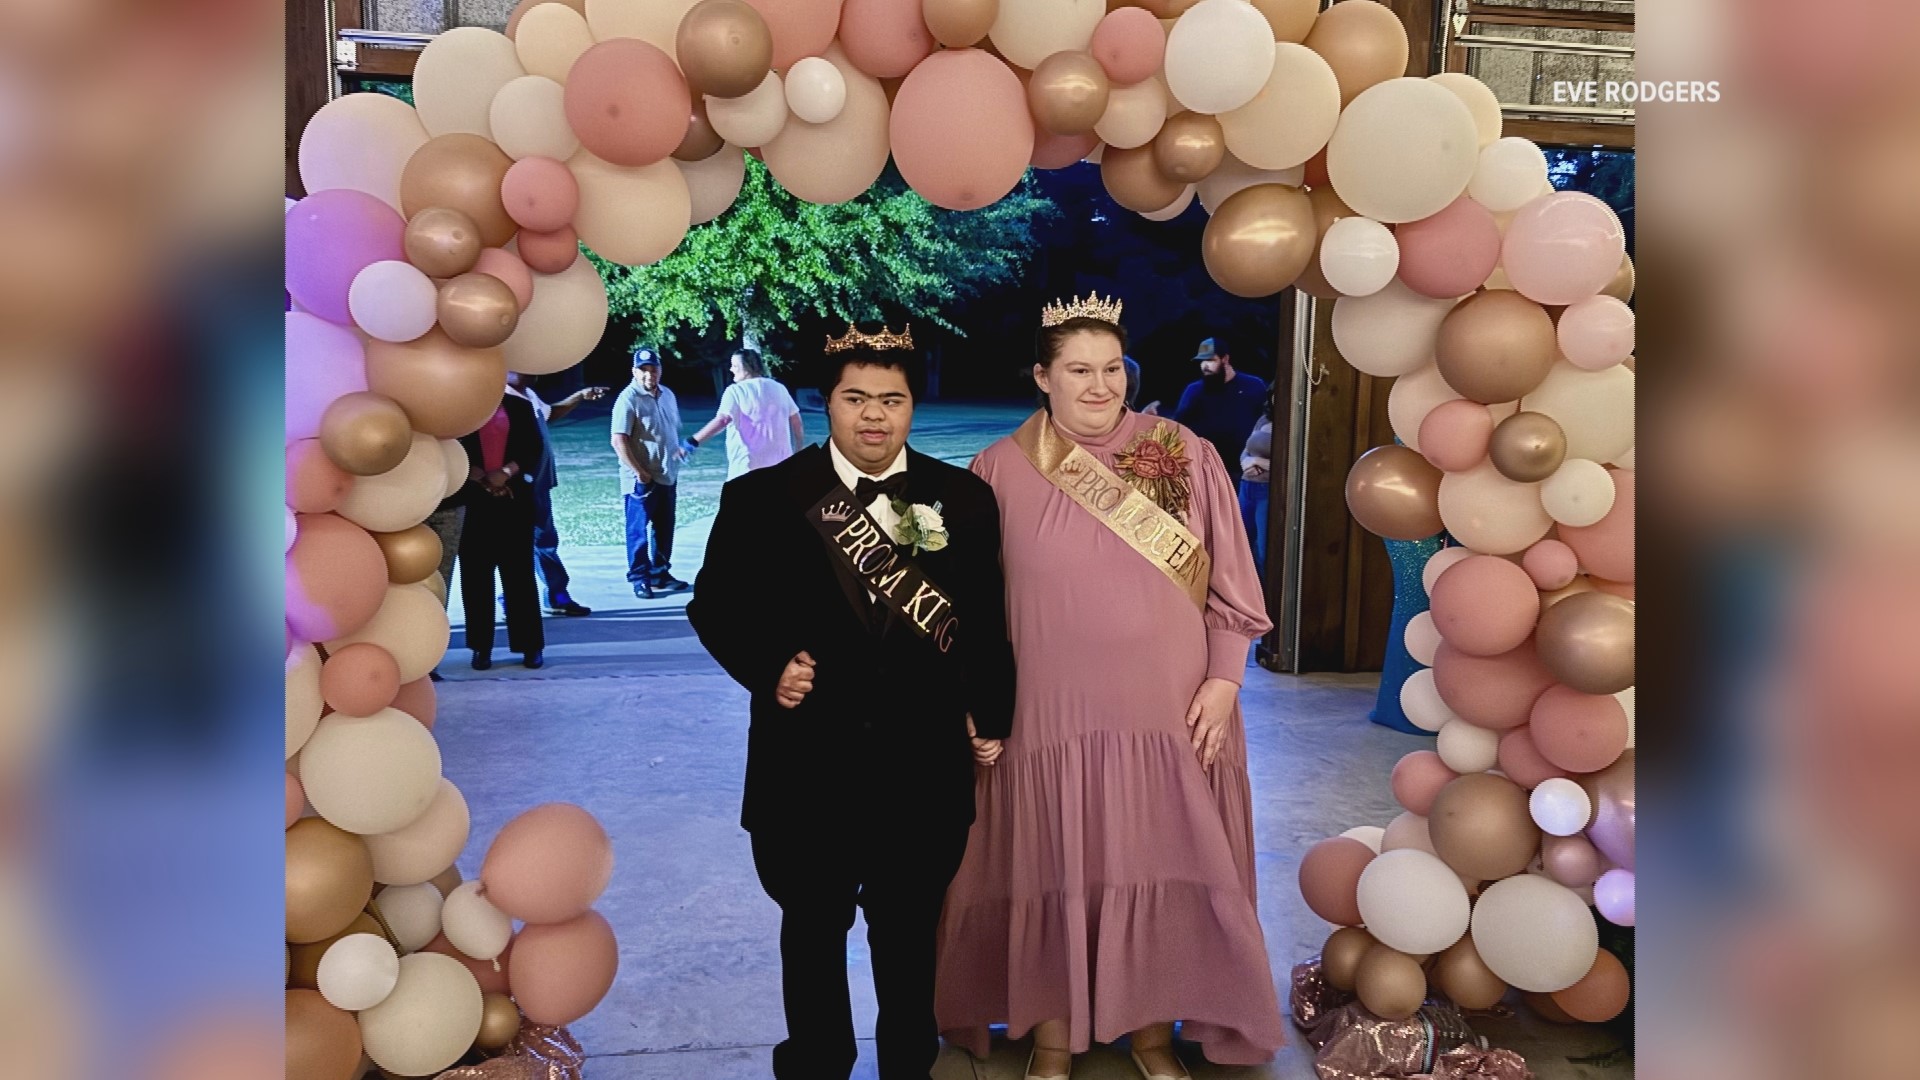 Seniors at Wheeler County High made prom night unforgettable for all of us.